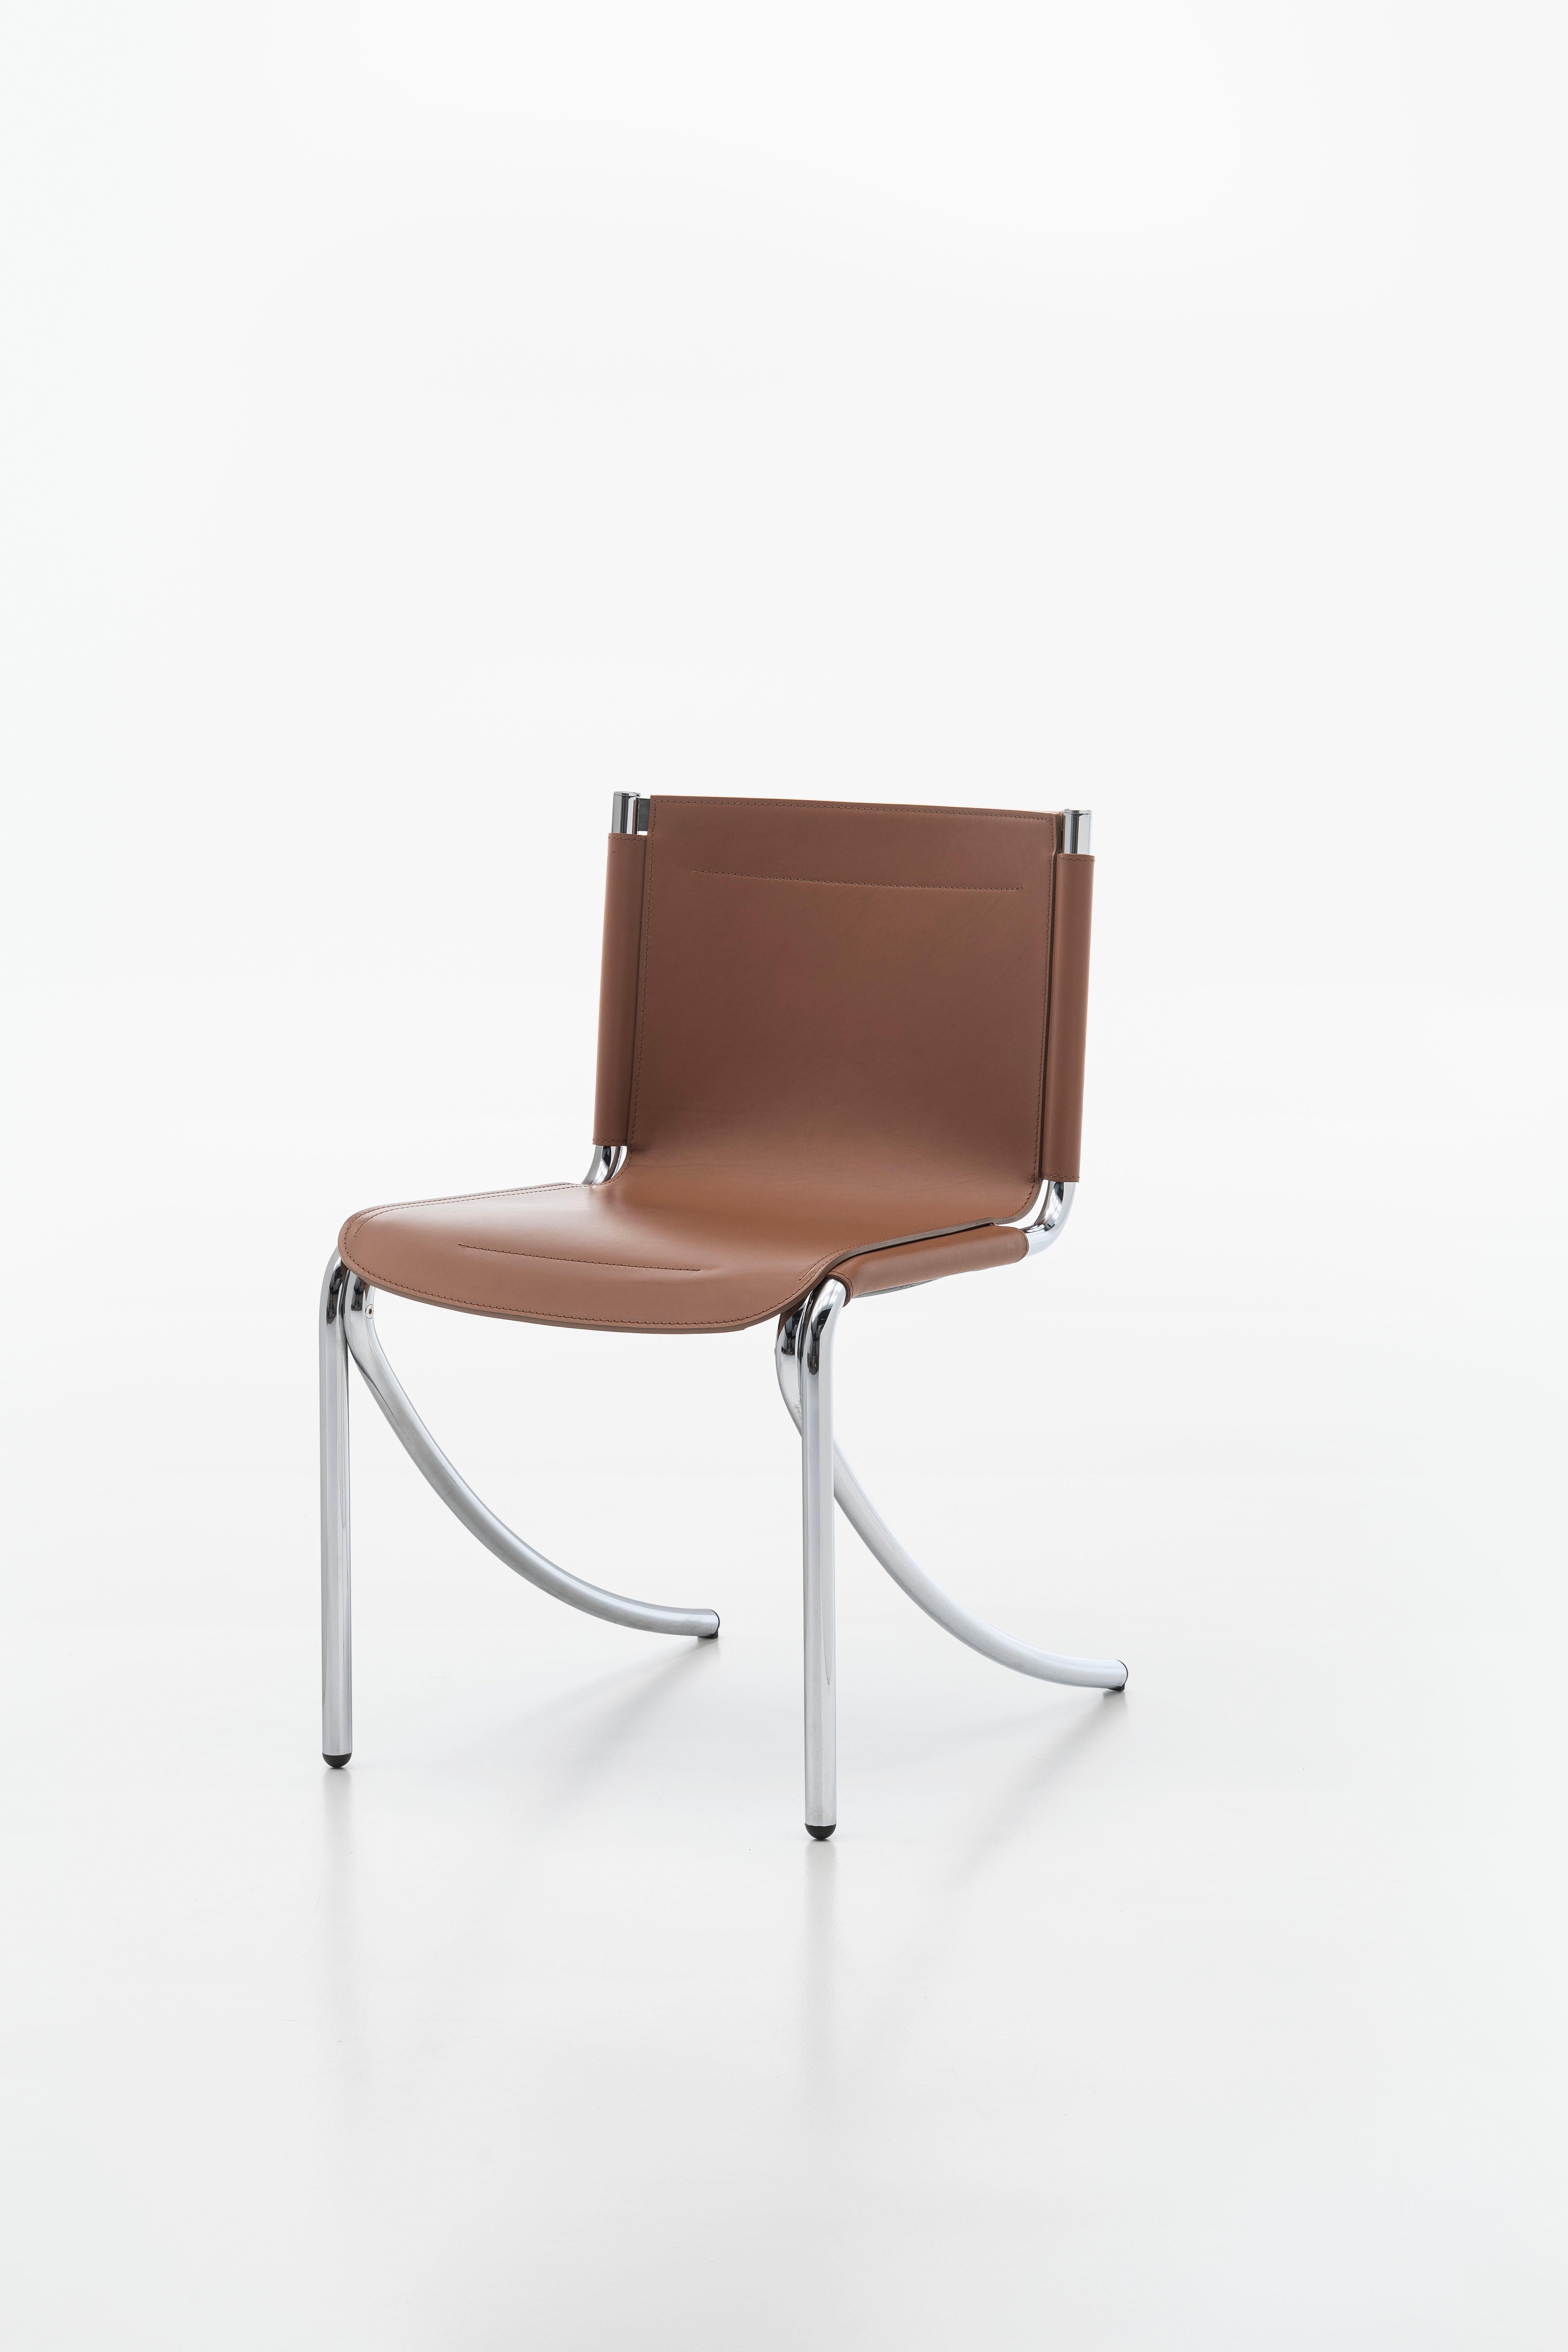 In Giotto Stoppino’s artistic production, the tubular metal represented a design paradigm around which to build an imaginary full of possibilities and the symbol of industrial production at the service of design.
The JOT chair is one of the